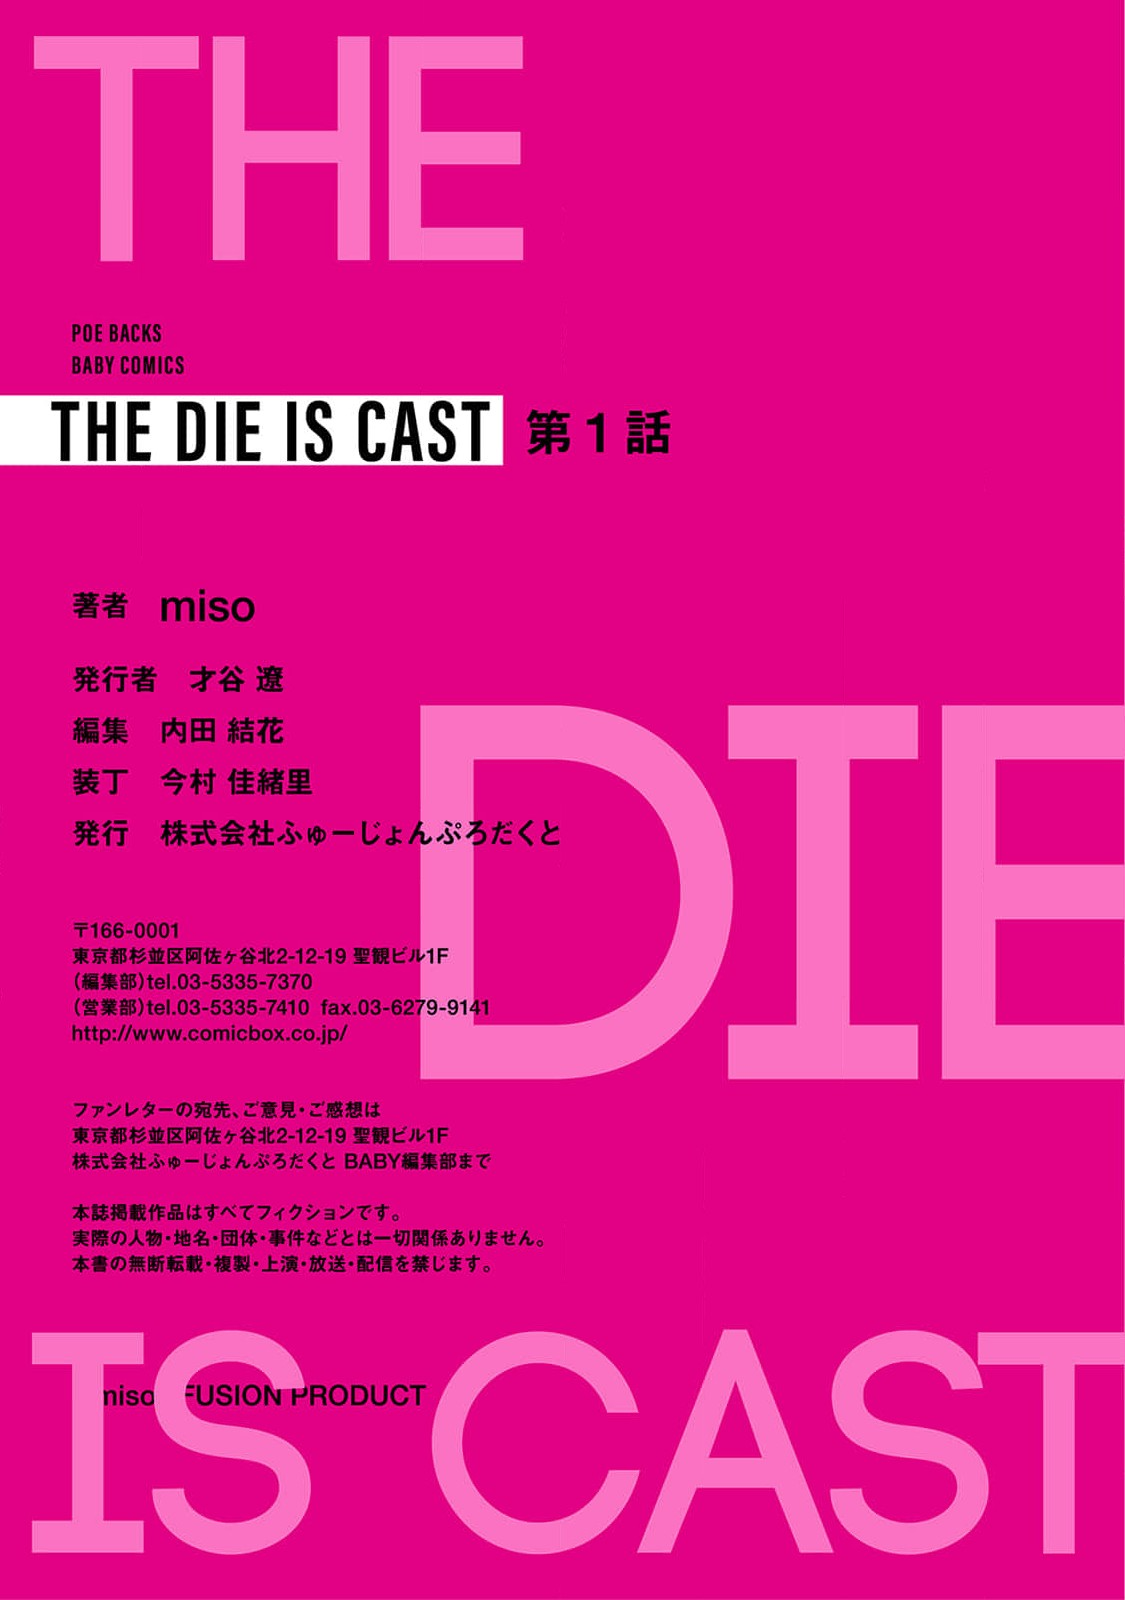 [miso] THE DIE IS CAST 1 [Chinese] [莉赛特汉化组] [miso] THE DIE IS CAST 1 [中国翻訳]